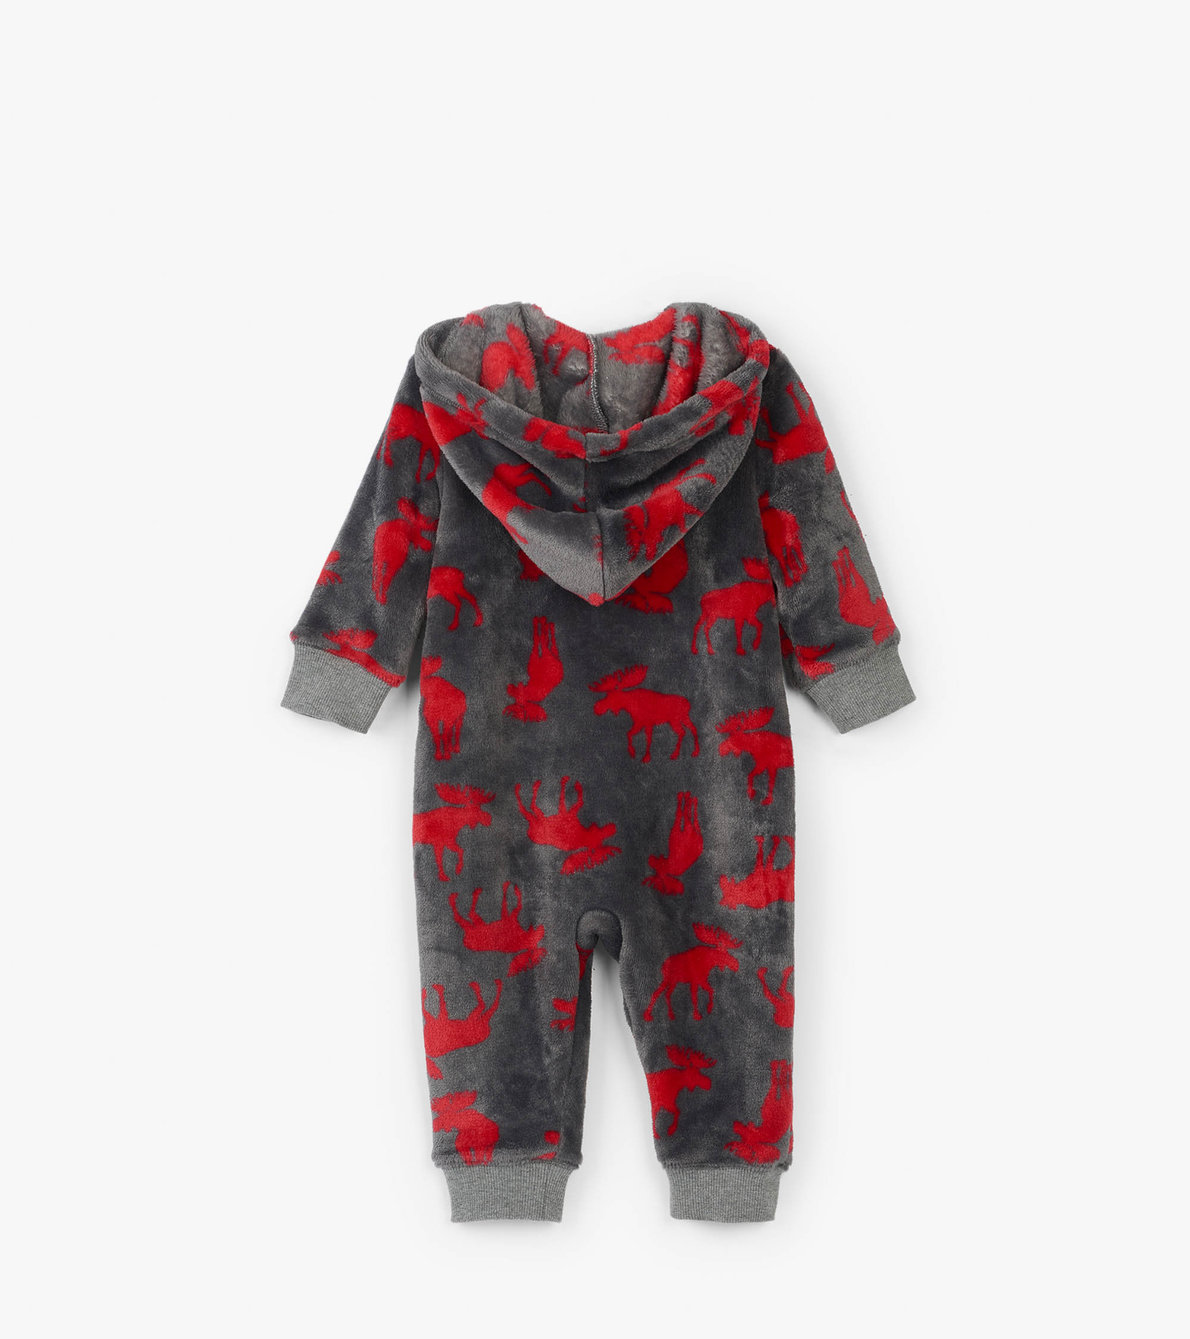 View larger image of Moose on Charcoal Baby Hooded Fleece Jumpsuit